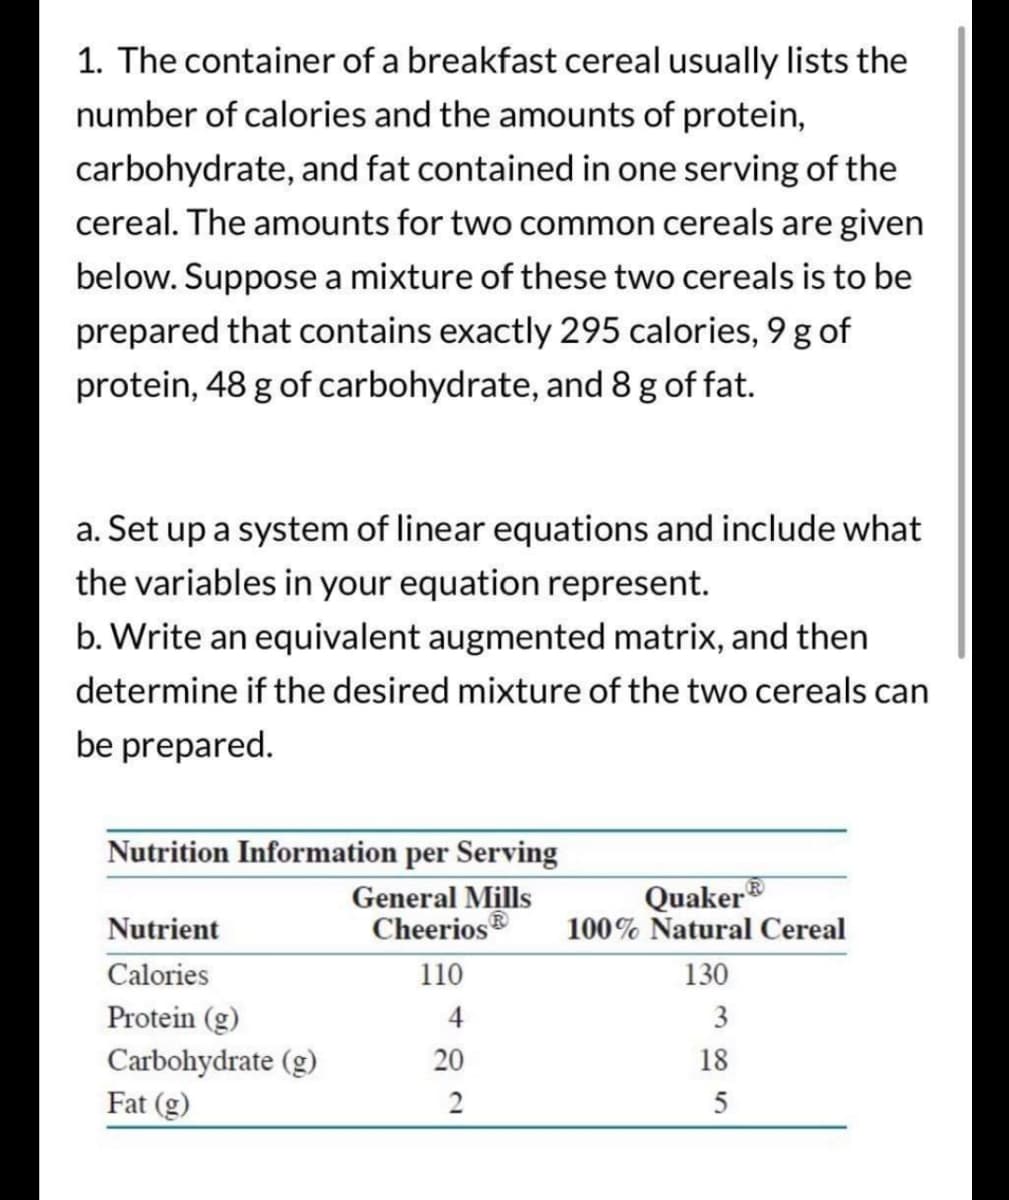 1. The container of a breakfast cereal usually lists the
number of calories and the amounts of protein,
carbohydrate, and fat contained in one serving of the
cereal. The amounts for two common cereals are given
below. Suppose a mixture of these two cereals is to be
prepared that contains exactly 295 calories, 9 g of
protein, 48 g of carbohydrate, and 8 g of fat.
a. Set up a system of linear equations and include what
the variables in your equation represent.
b. Write an equivalent augmented matrix, and then
determine if the desired mixture of the two cereals can
be prepared.
Nutrition Information per Serving
General Mills
Cheerios
Nutrient
Calories
Protein (g)
Carbohydrate (g)
Fat (g)
110
4
20
2
Quaker
100% Natural Cereal
130
3
18
5